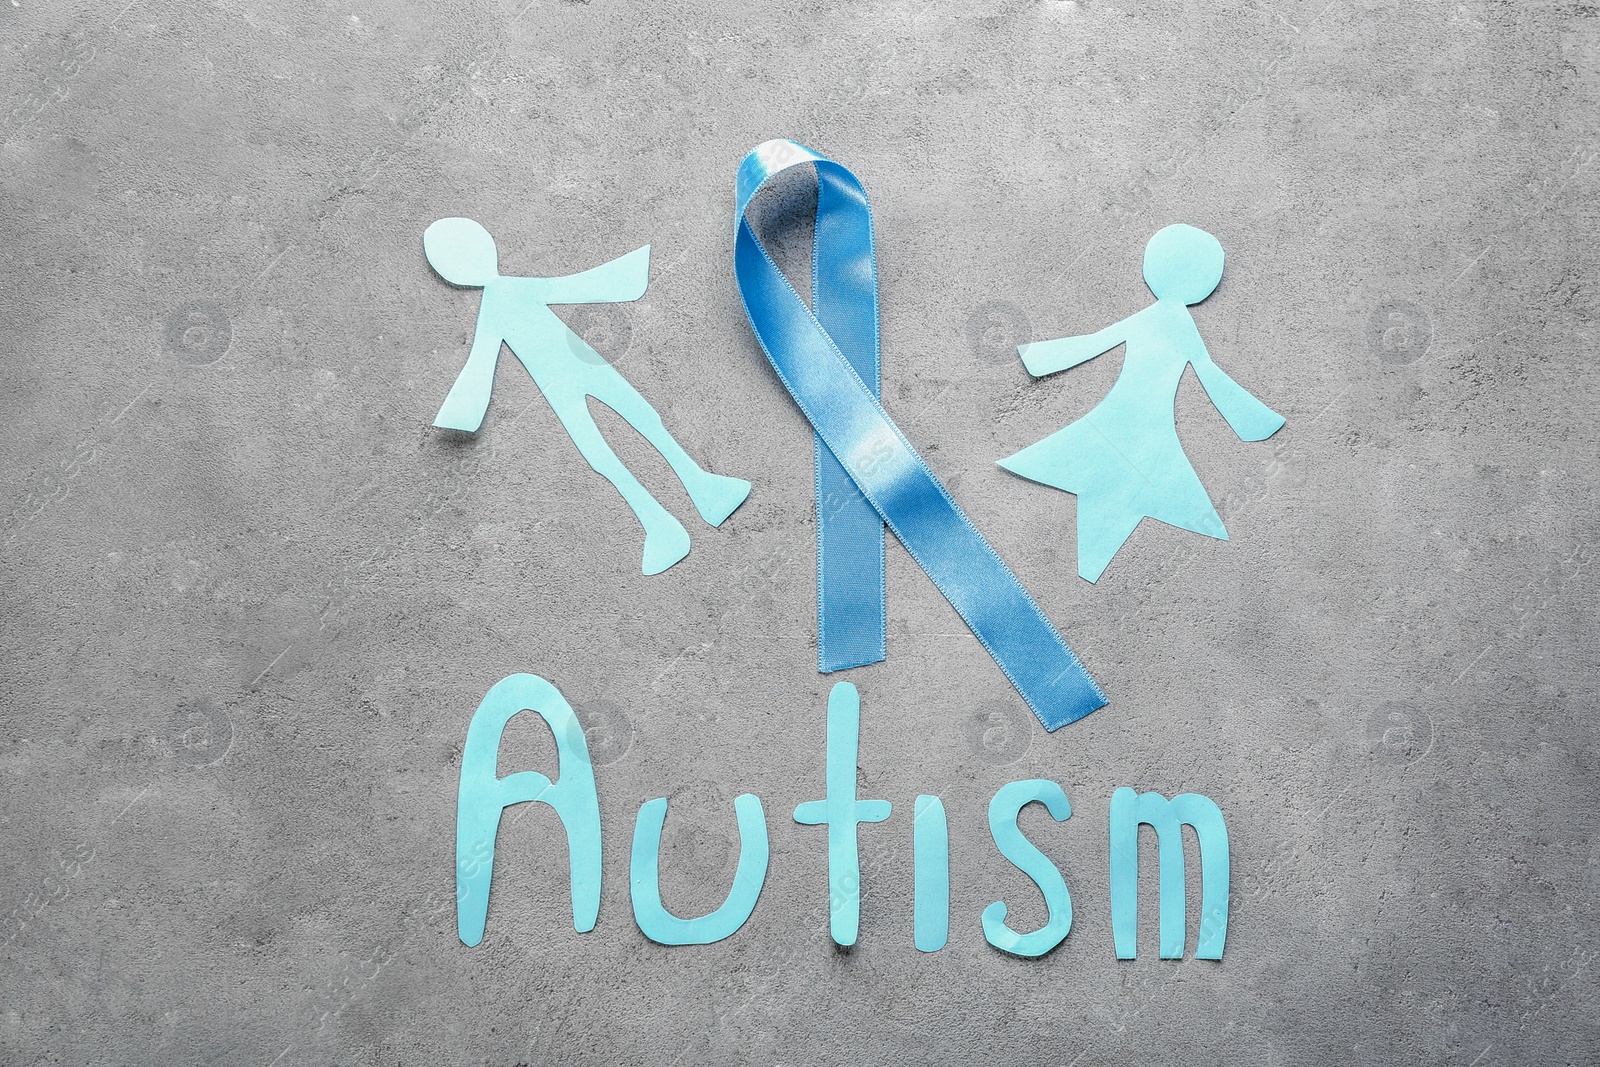 Photo of Word "Autism", paper figures and blue ribbon on light background